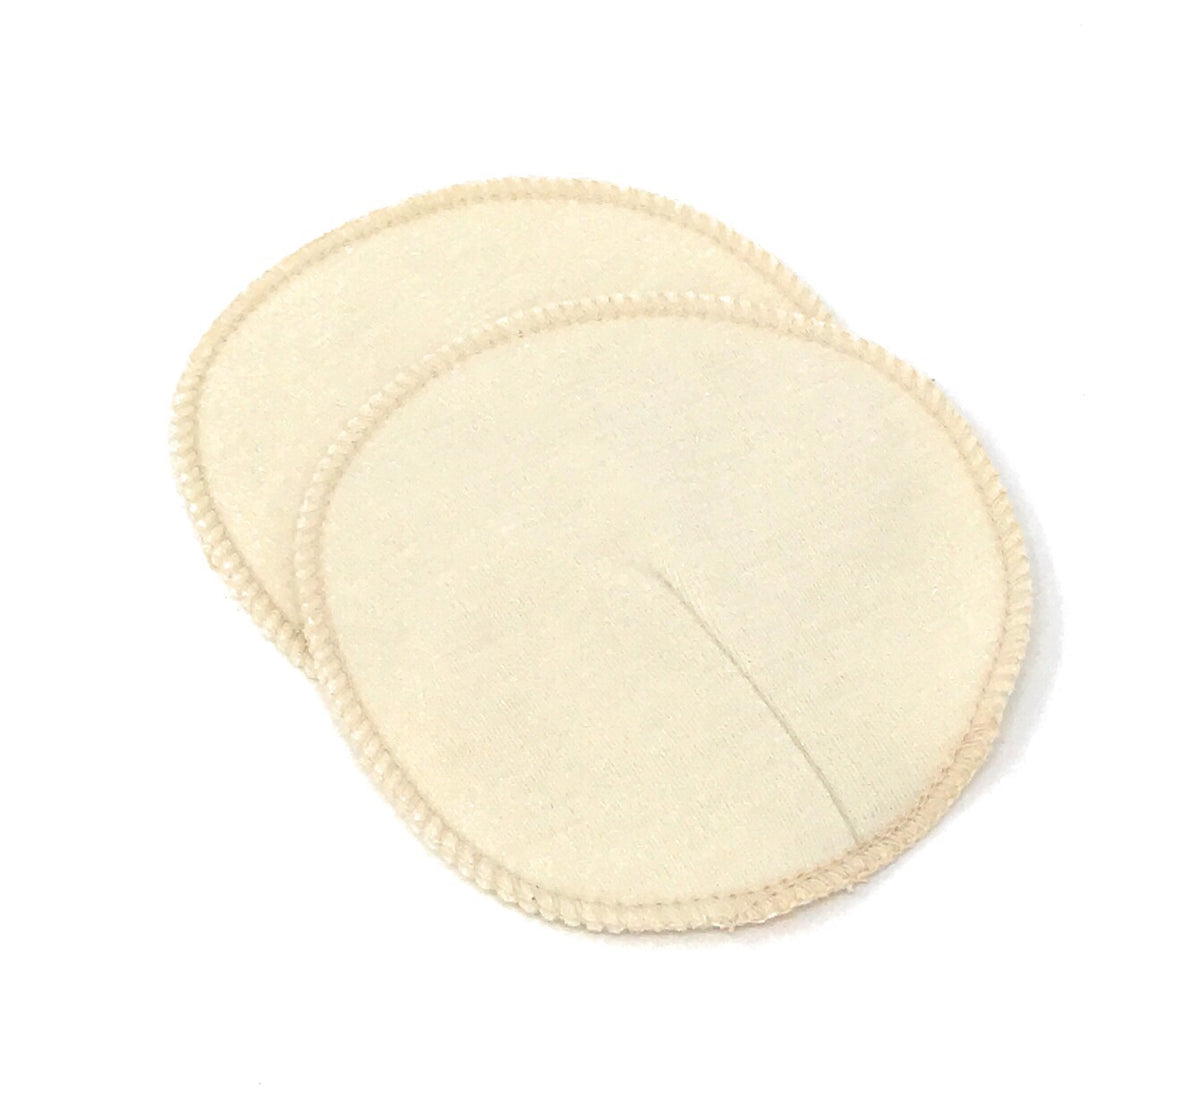  TL Care Nursing Pads Made with Organic Cotton, Natural Color,  6 Count : Nursing Bra Pads : Baby